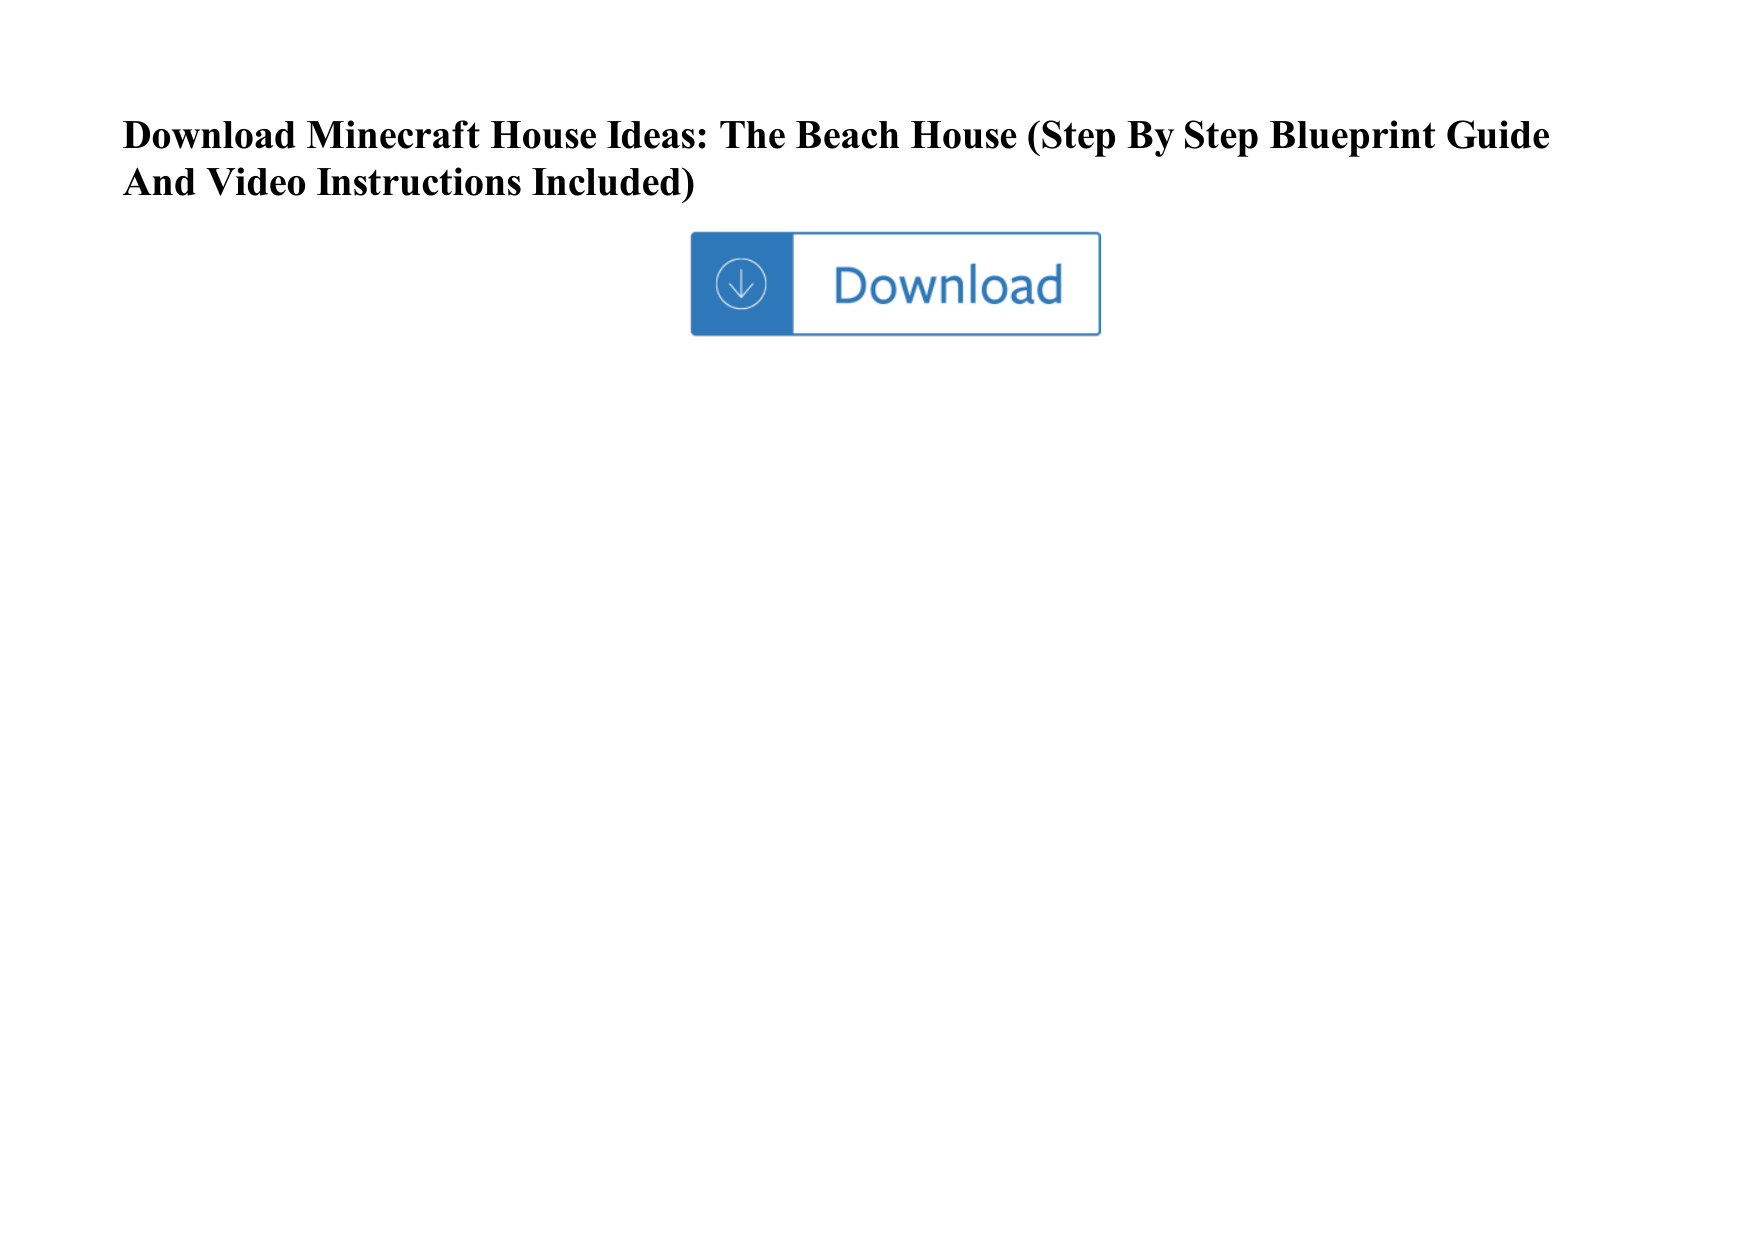 Page 1 of 1 - Minecraft House Ideas: The Beach (Step By Step Blueprint Guide And Video Instructions Included) Minecraft-house-ideas-the-beach-house-step-by-step-blueprint-guide-and-video-instructions-included